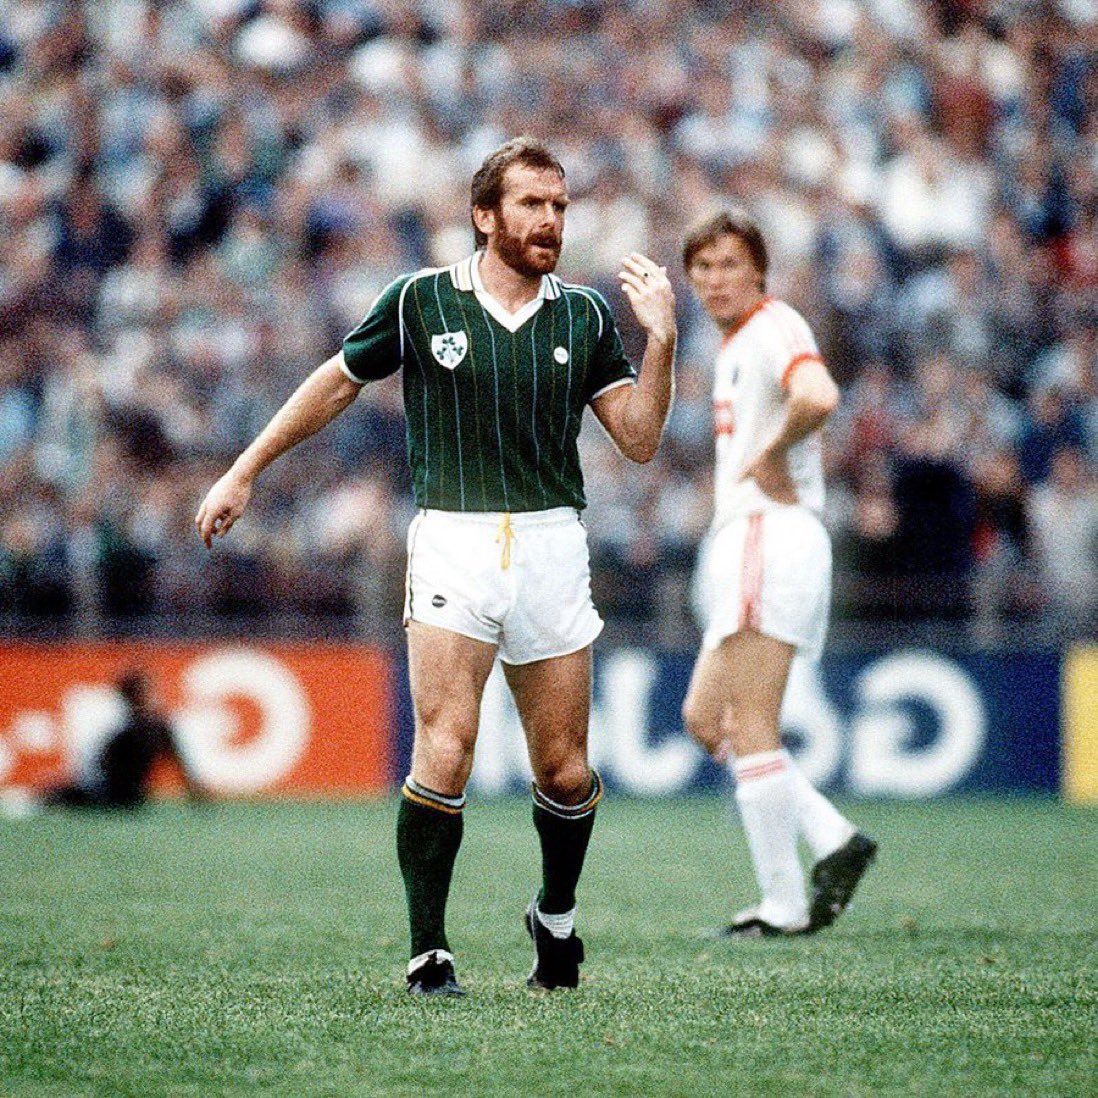 Remembering former Ireland midfielder and captain Tony Grealish who sadly passed away on this day in 2013. Tony left everything on the pitch and defined a ‘never say die’ attitude 45 caps/8 goals in green